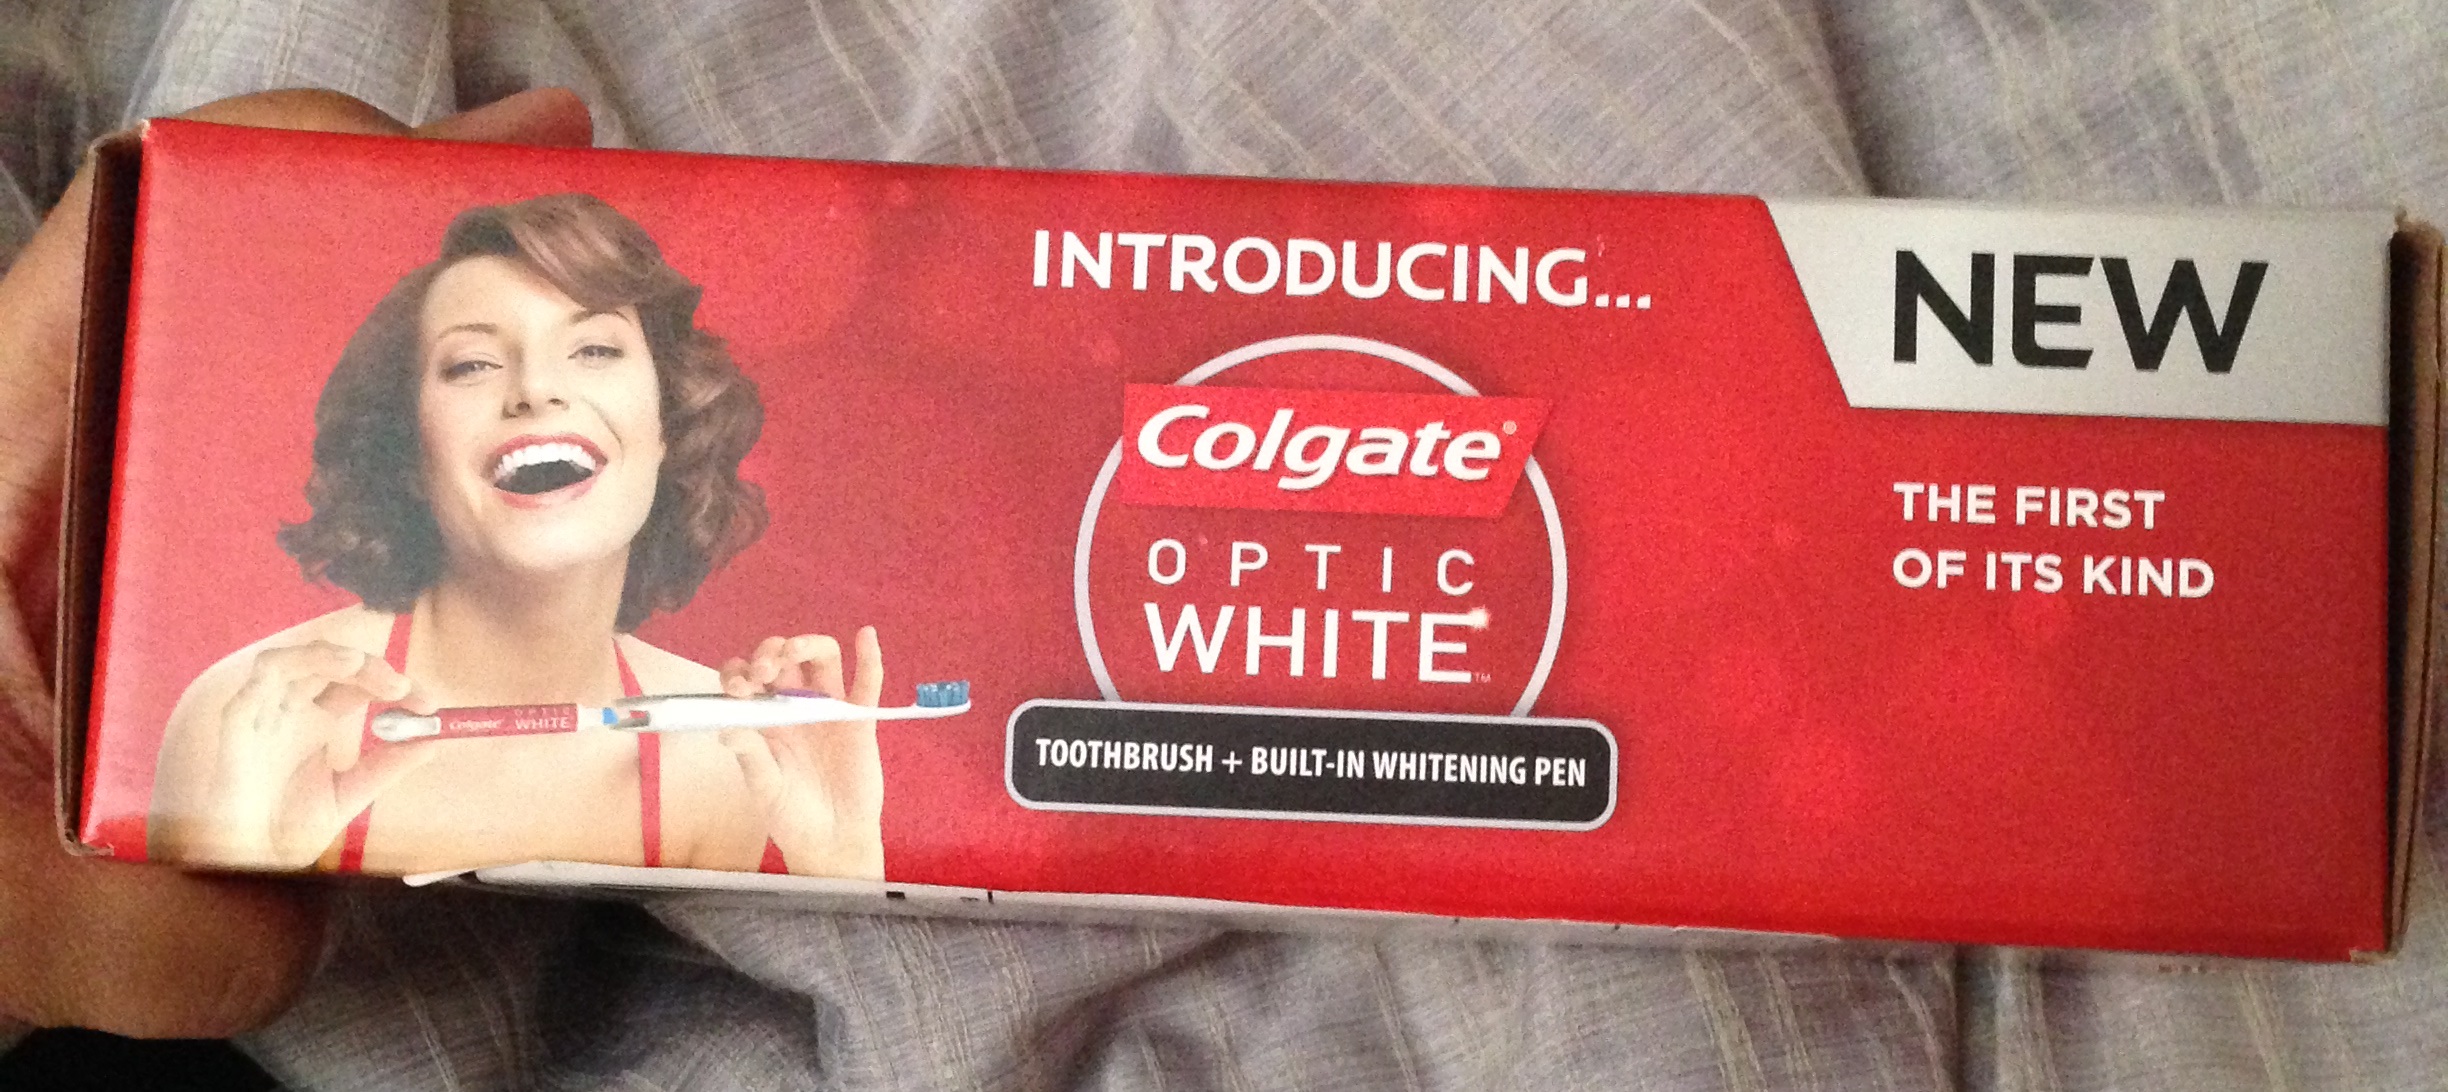 colgate toothbrush with whitening pen instructions